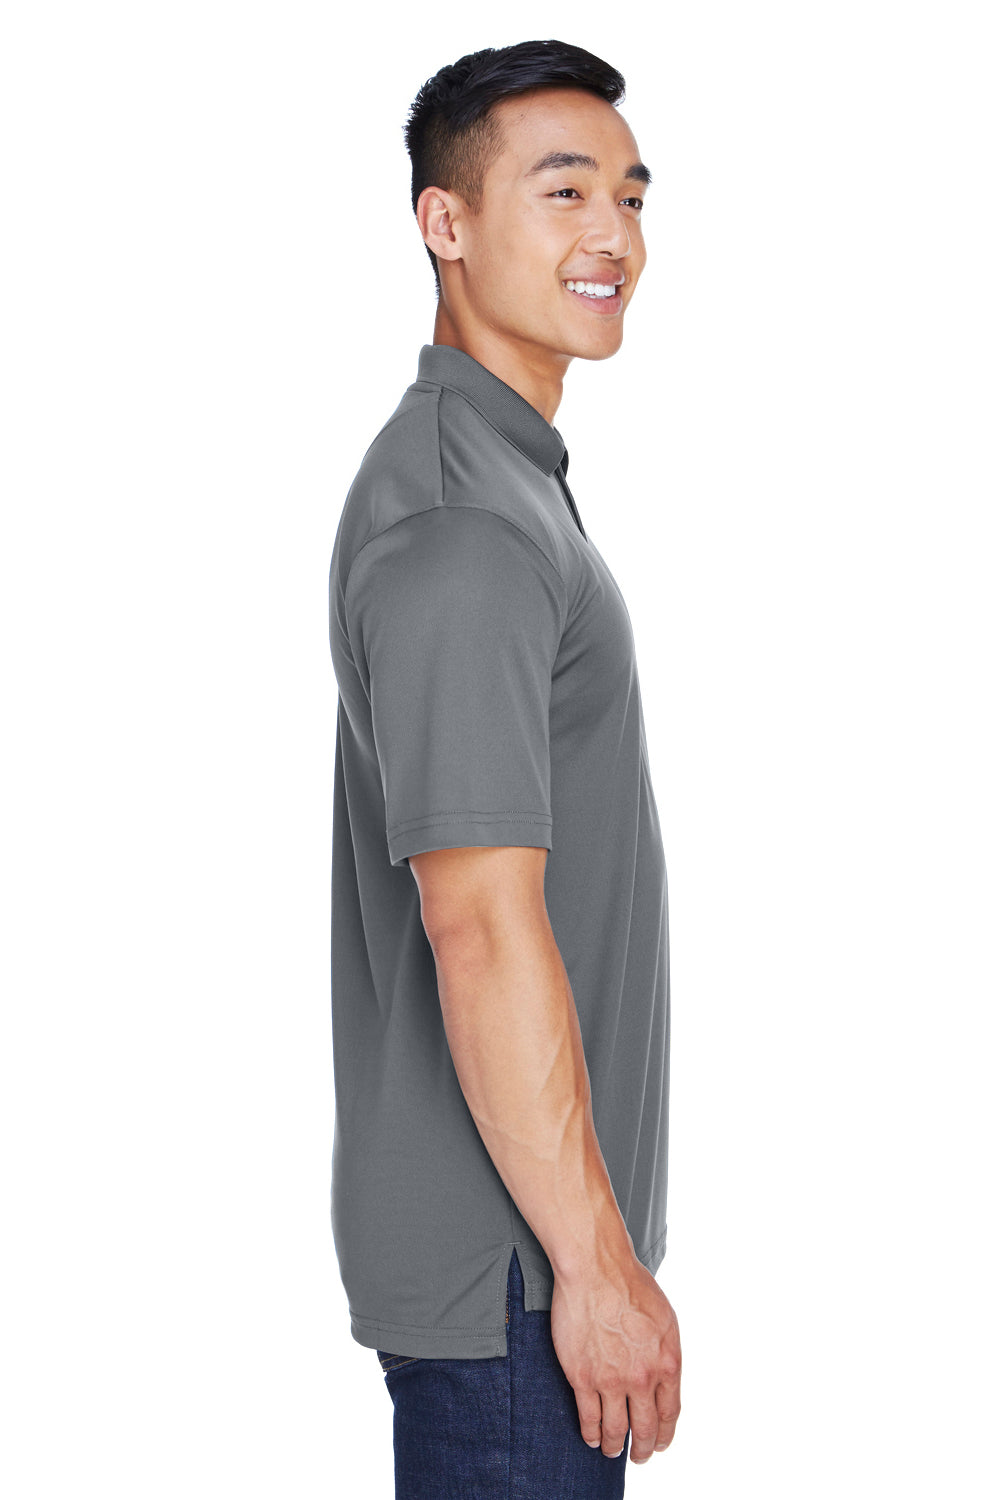 UltraClub 8405 Mens Cool & Dry Moisture Wicking Short Sleeve Polo Shirt Charcoal Grey Side